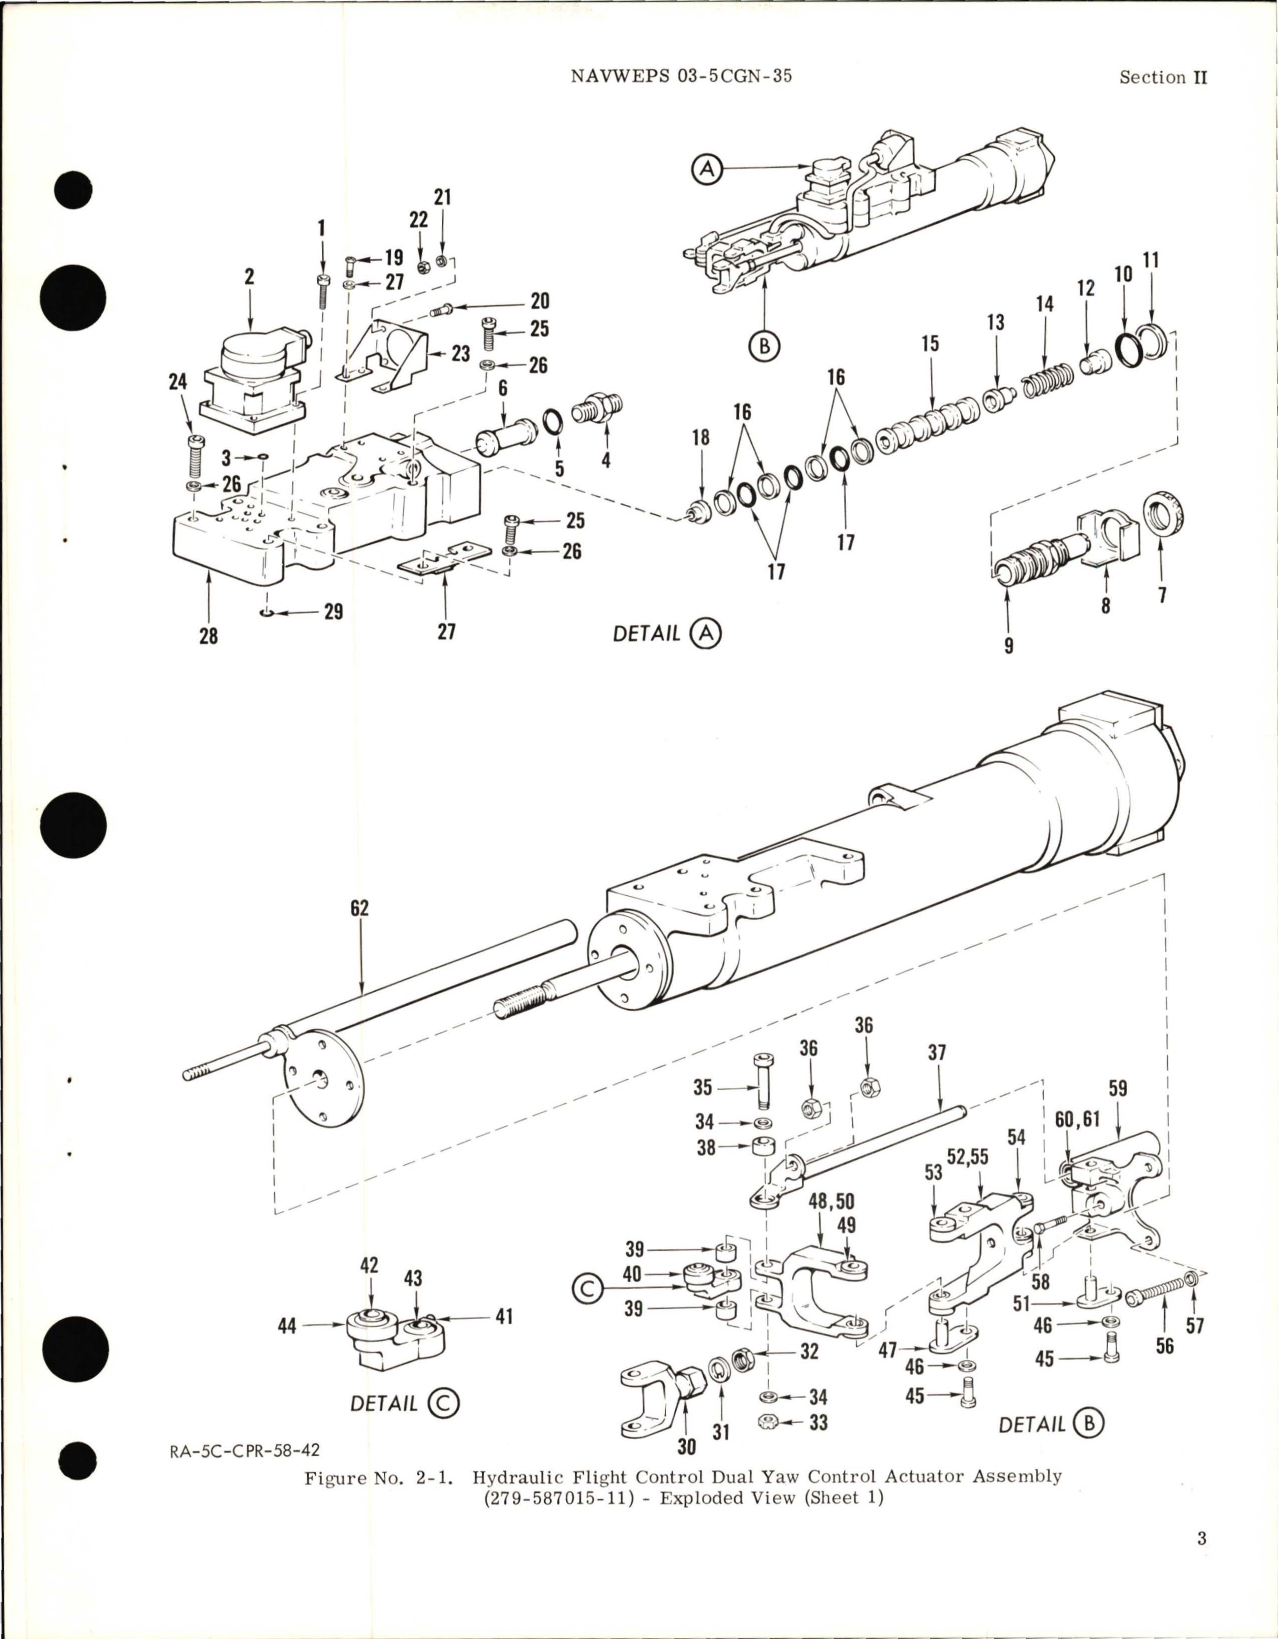 Sample page 5 from AirCorps Library document: Overhaul Instructions for Hydraulic Flight Control, Dual Yaw Control Actuator Assembly - Part 279-587015-11 